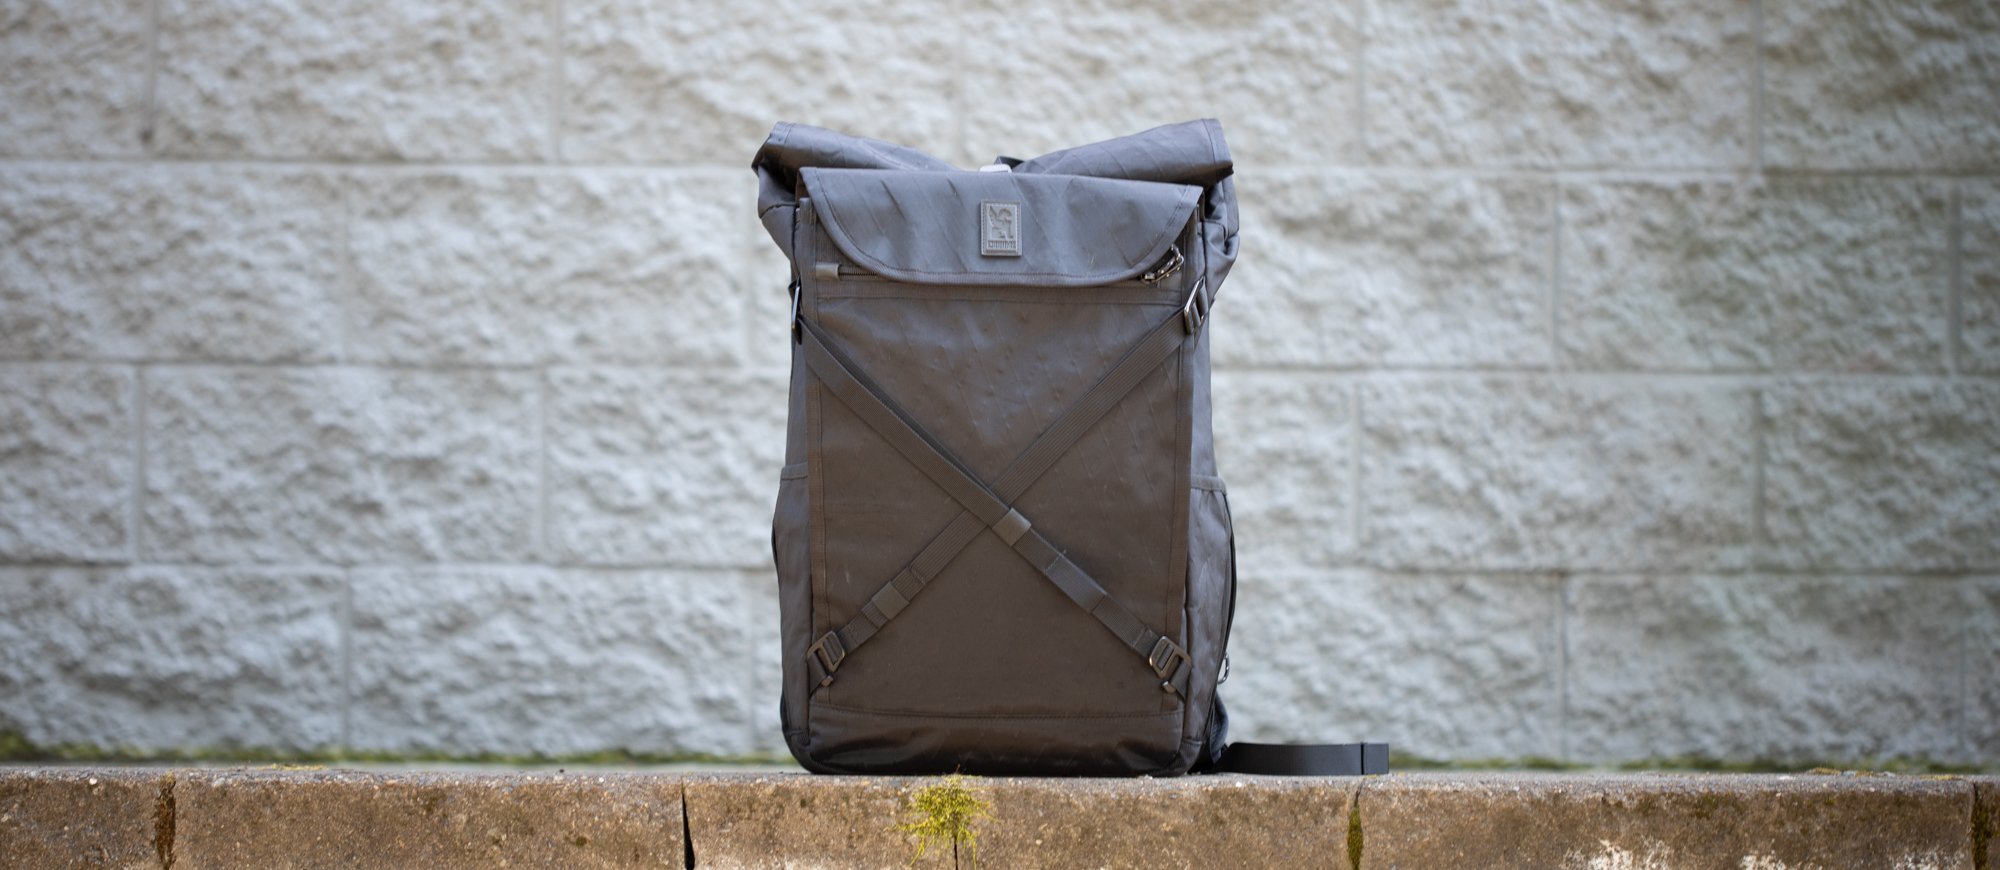 Chrome Industries Bravo 3.0 backpack review: Not just a status